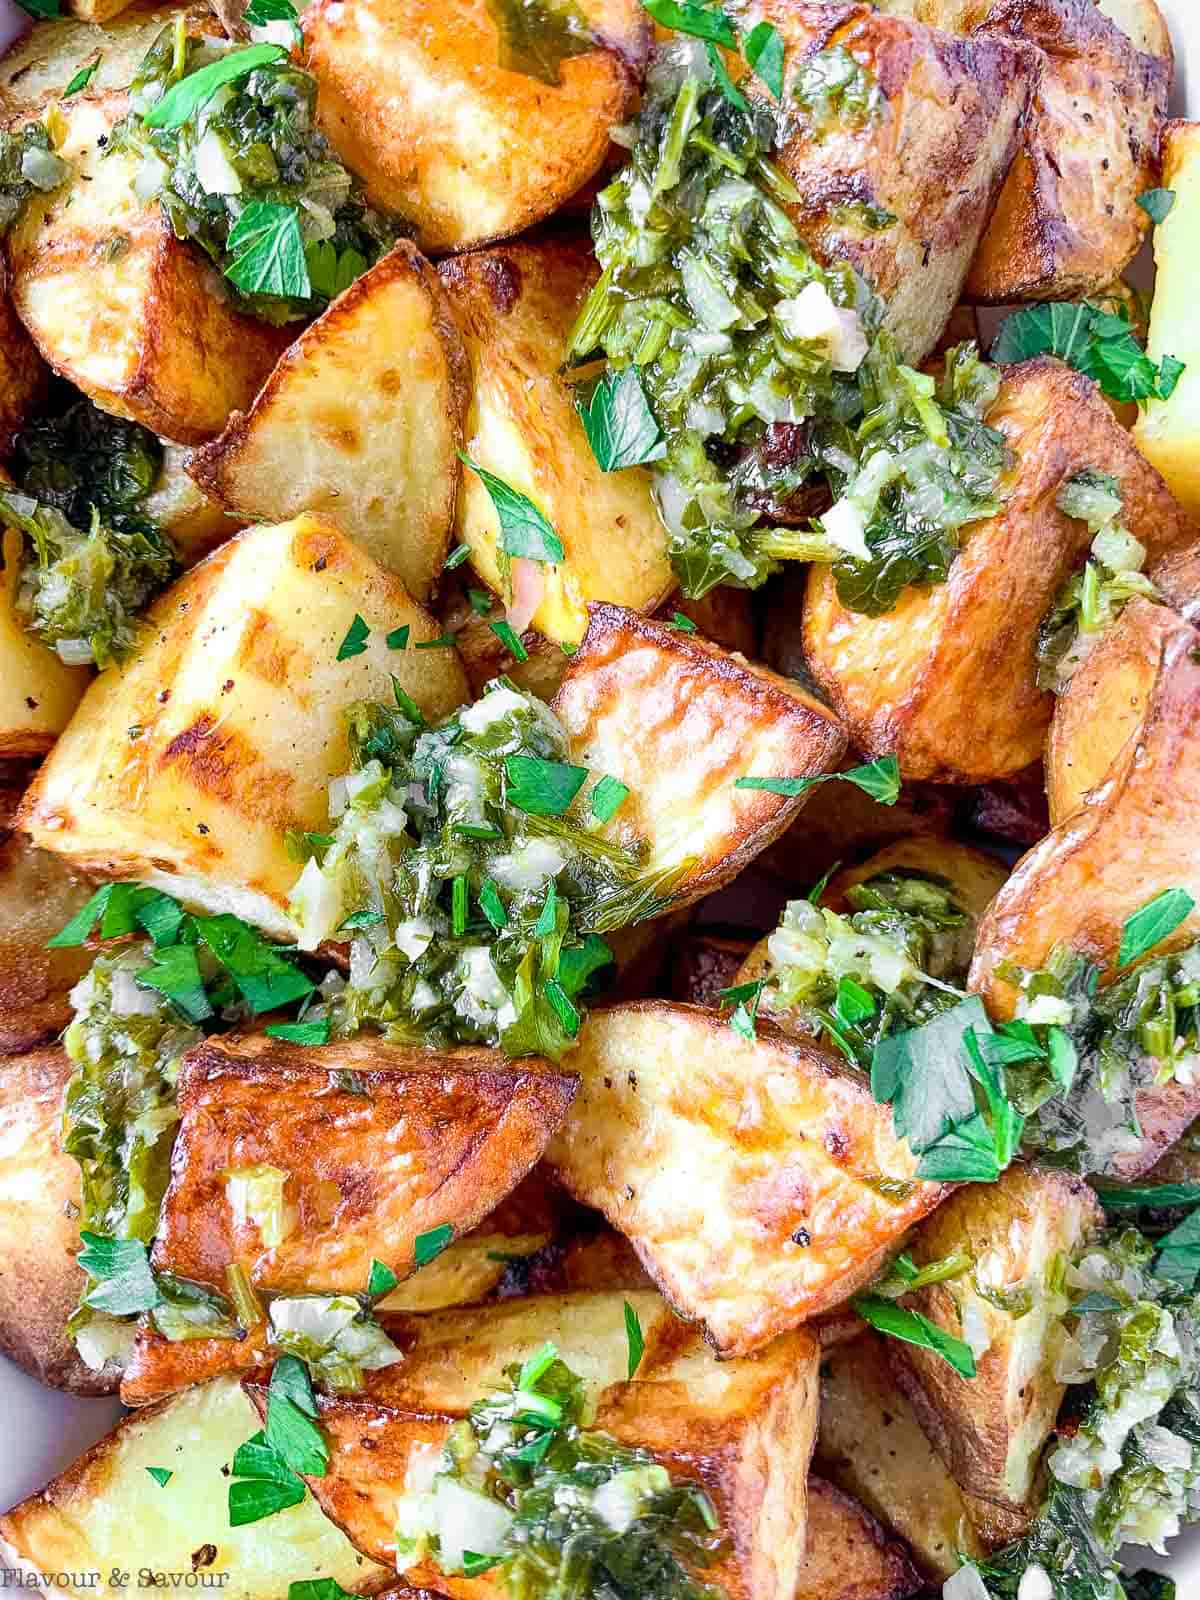 Extreme close up view of air fried potatoes with chimichurri sauce.